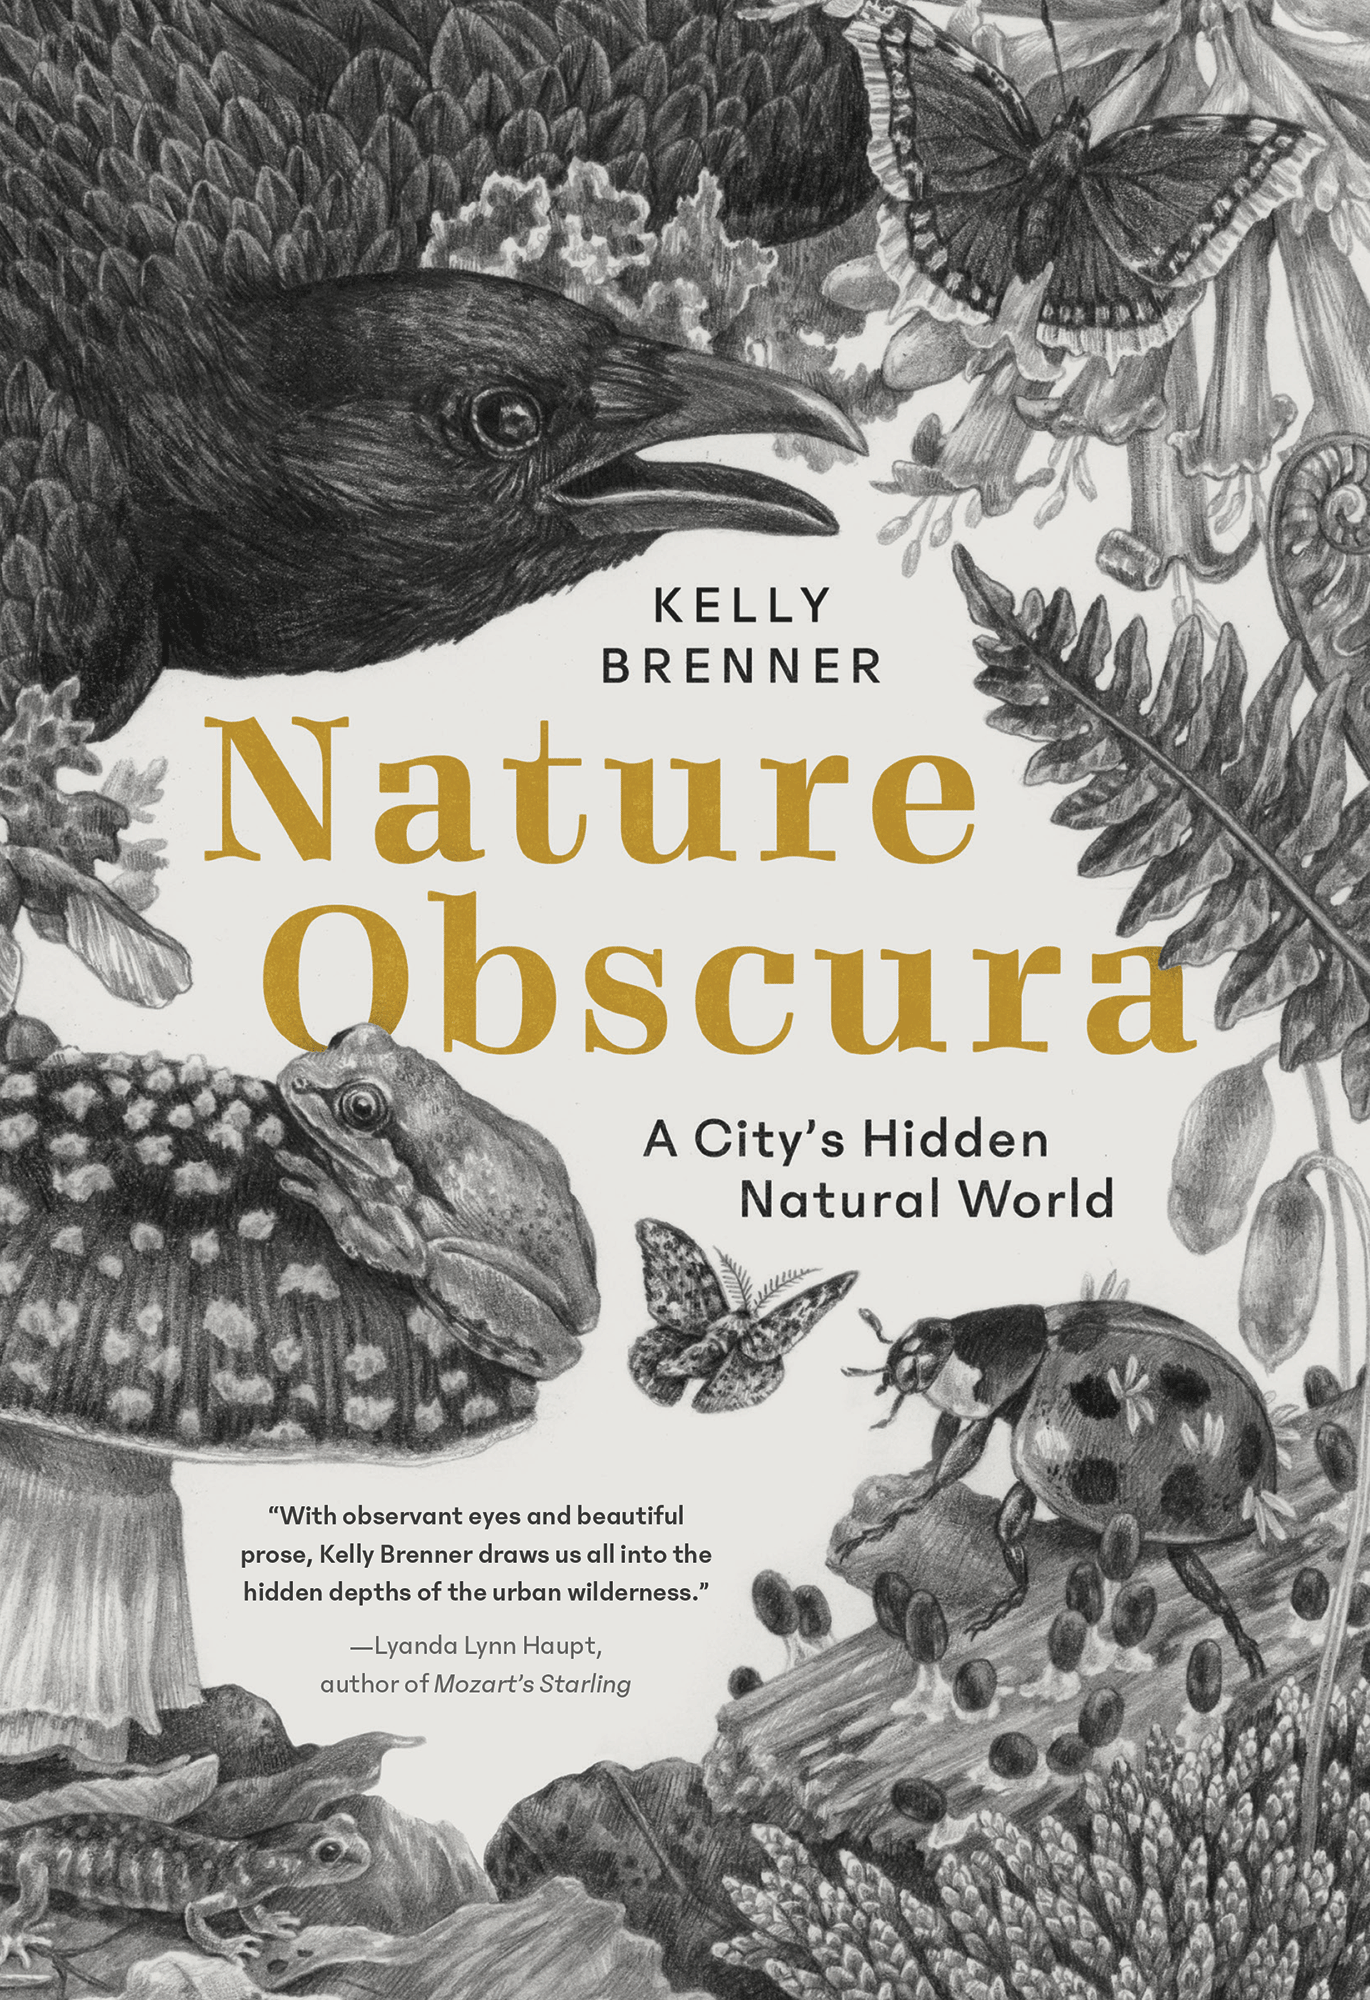 Nature Obscura Published!